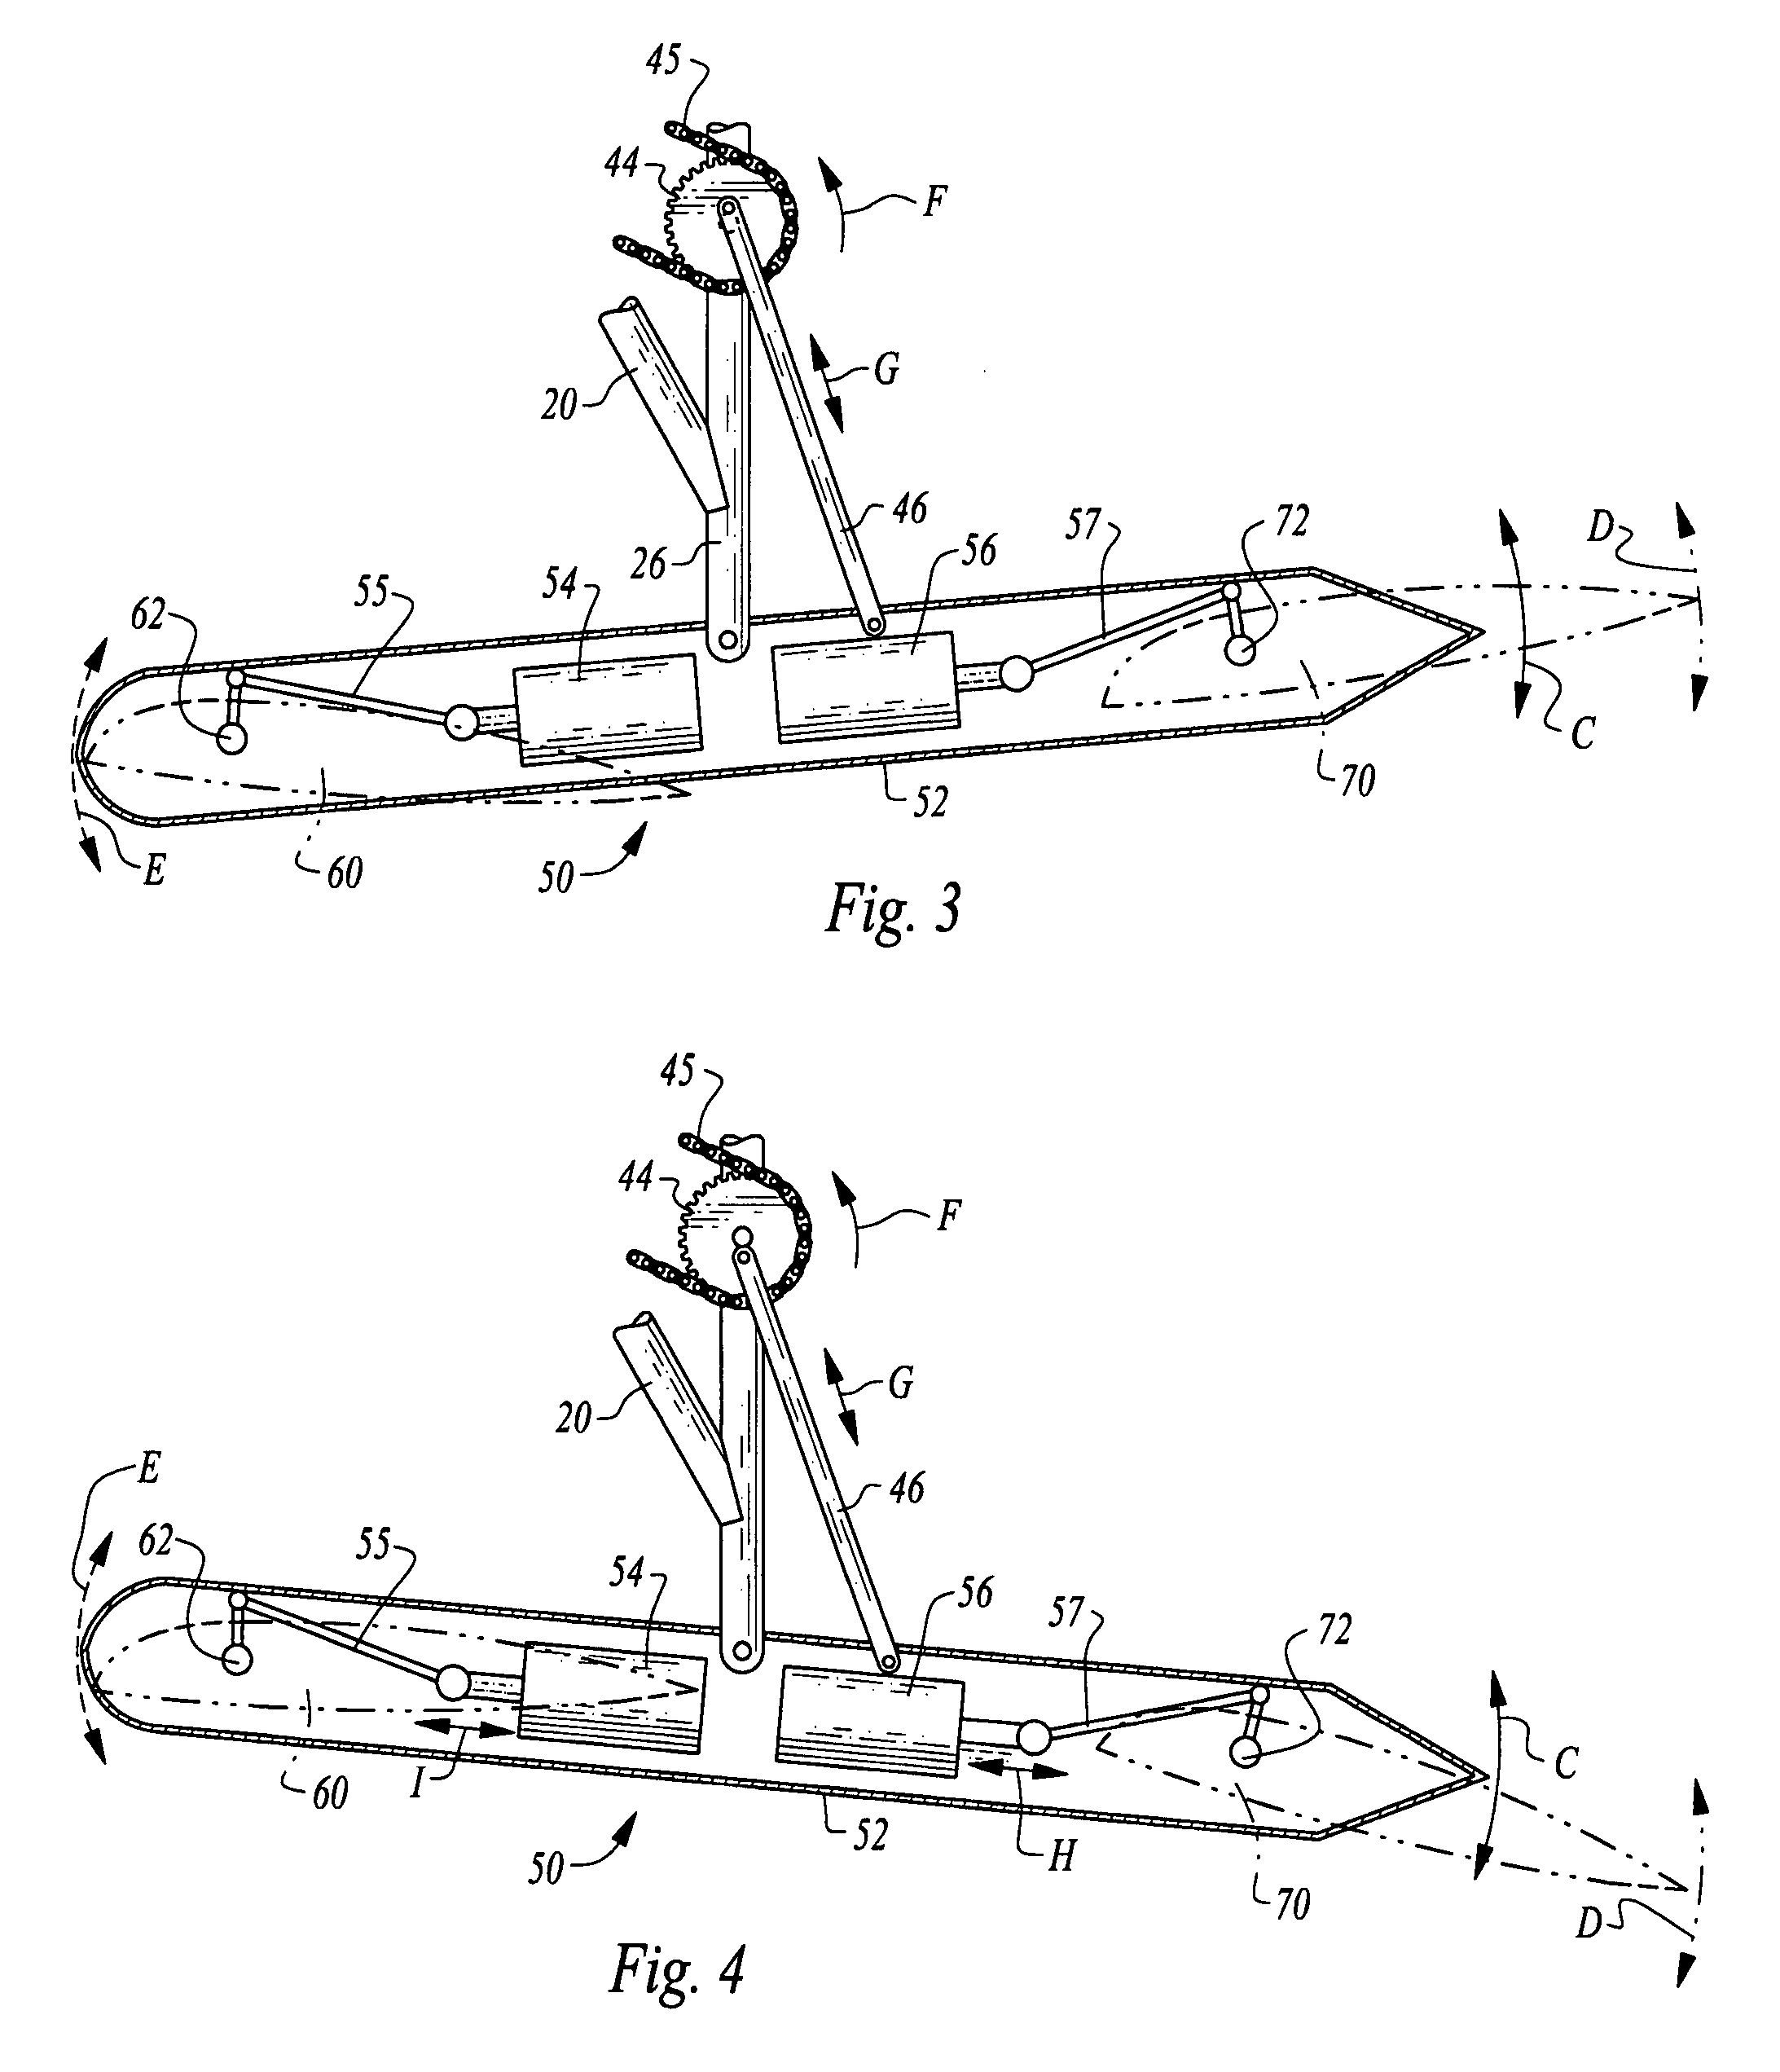 Human-powered flapping hydrofoil craft